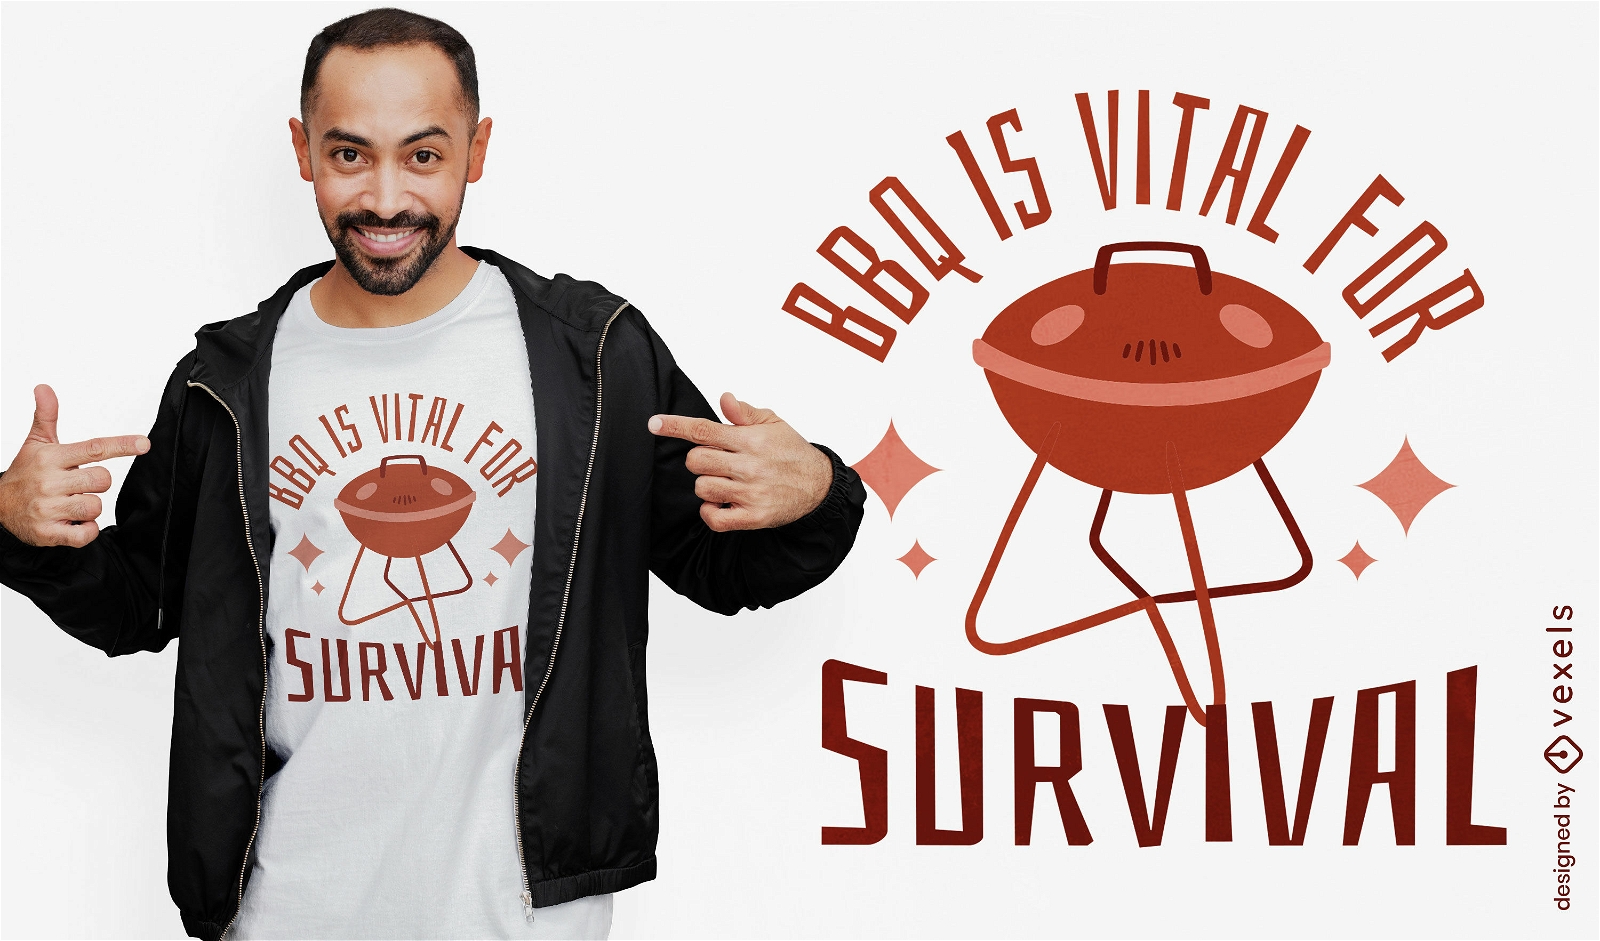 BBQ is vital quote t-shirt design